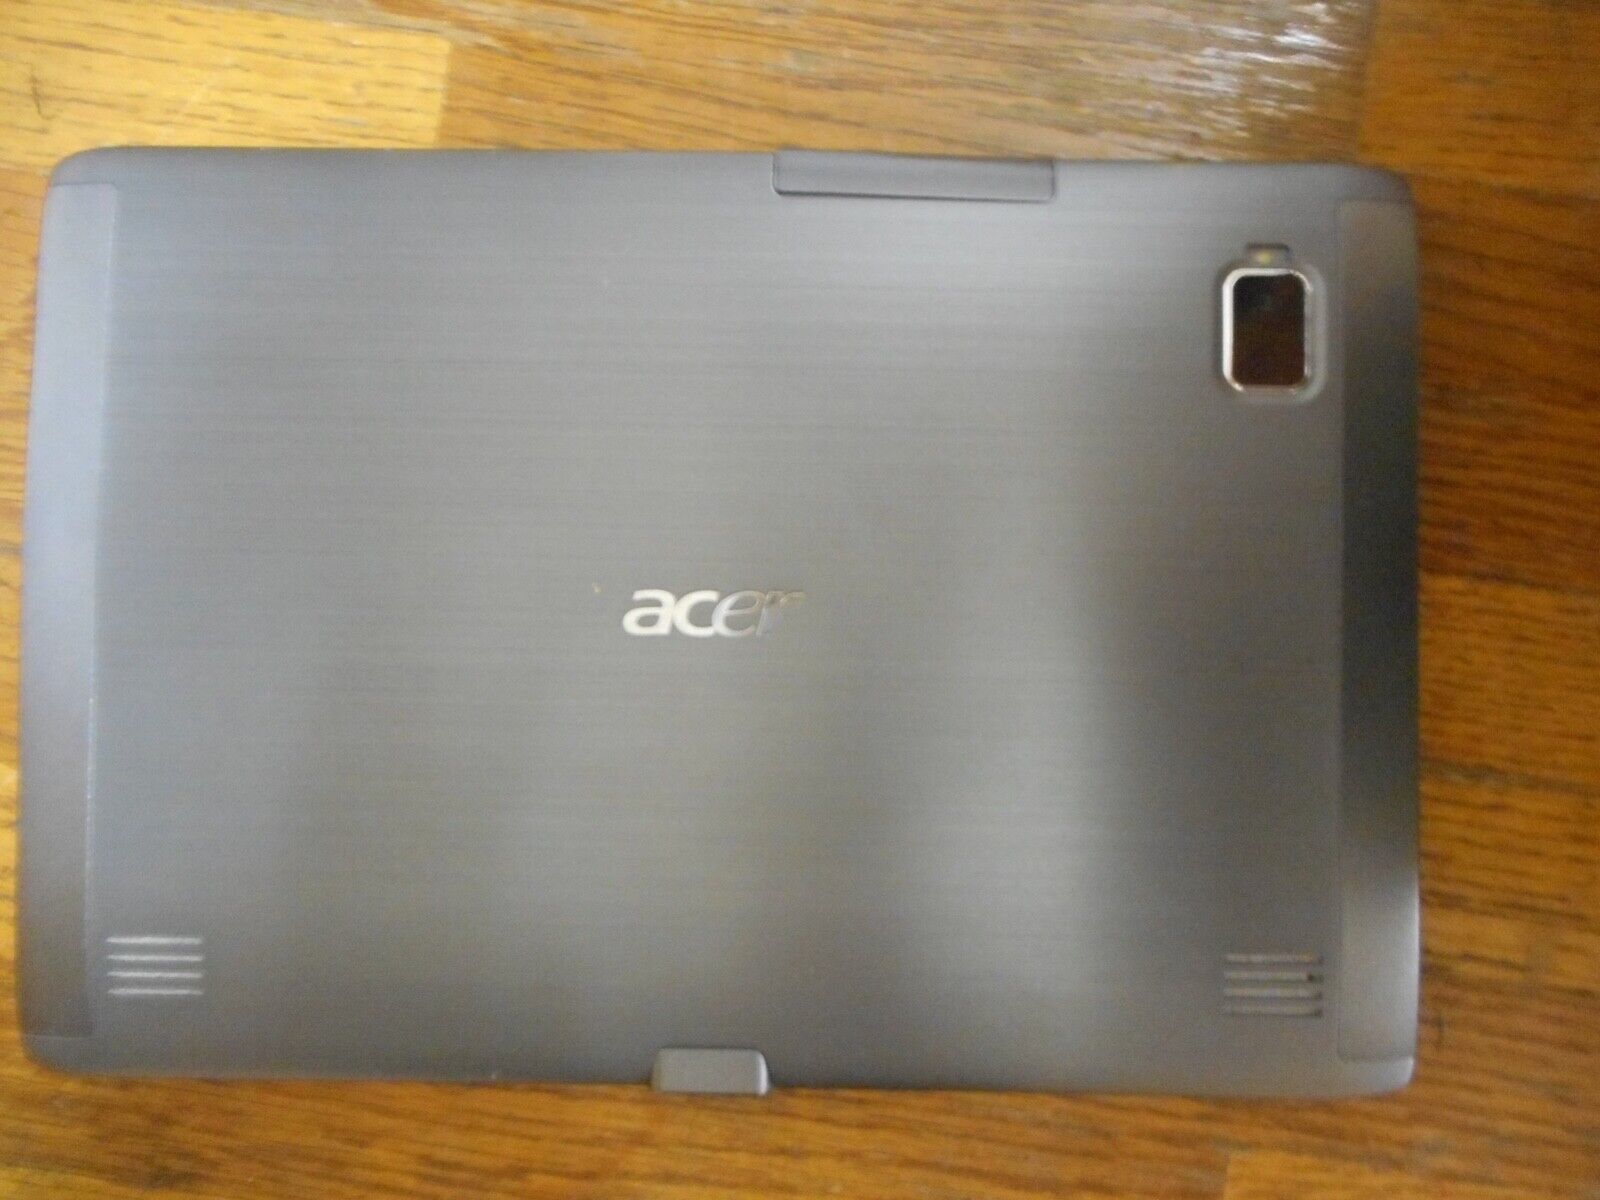 Primary image for Acer Iconia A500 Wi-Fi 10.1in Android Tablet for Parts or Repair